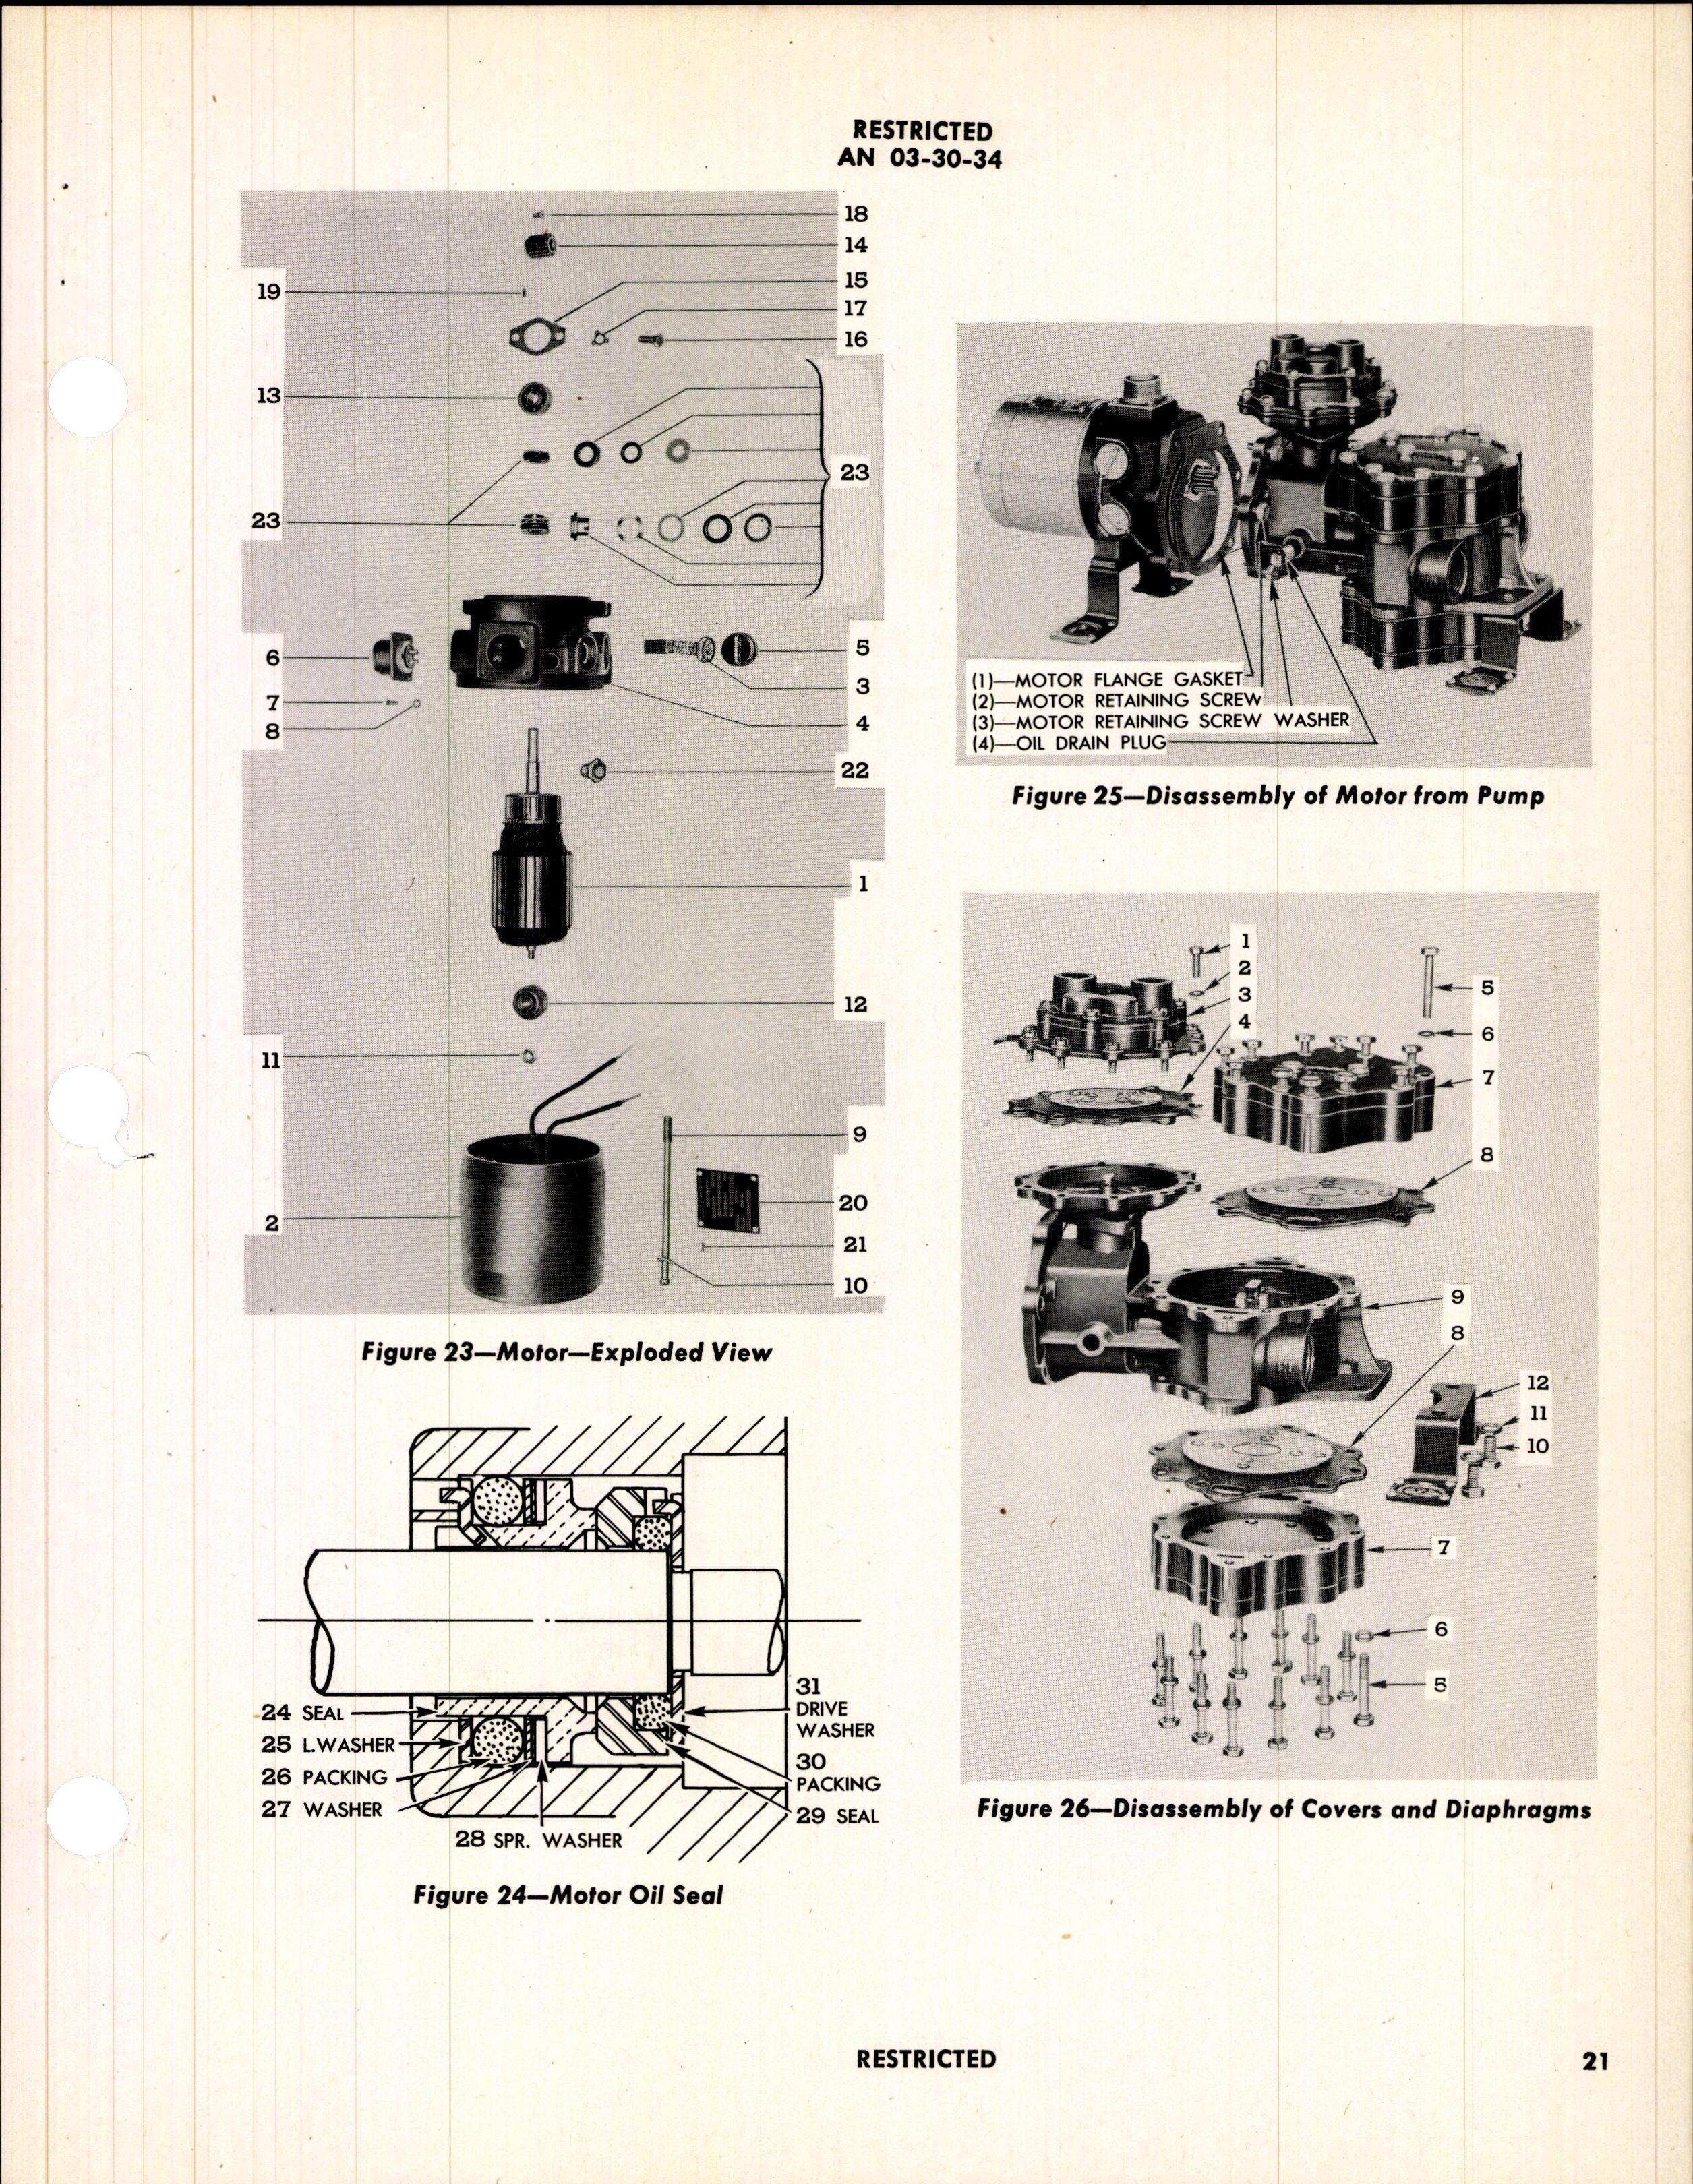 Sample page 25 from AirCorps Library document: Handbook of Instructions with Parts Catalog for Combination Pressure and Vacuum Pump